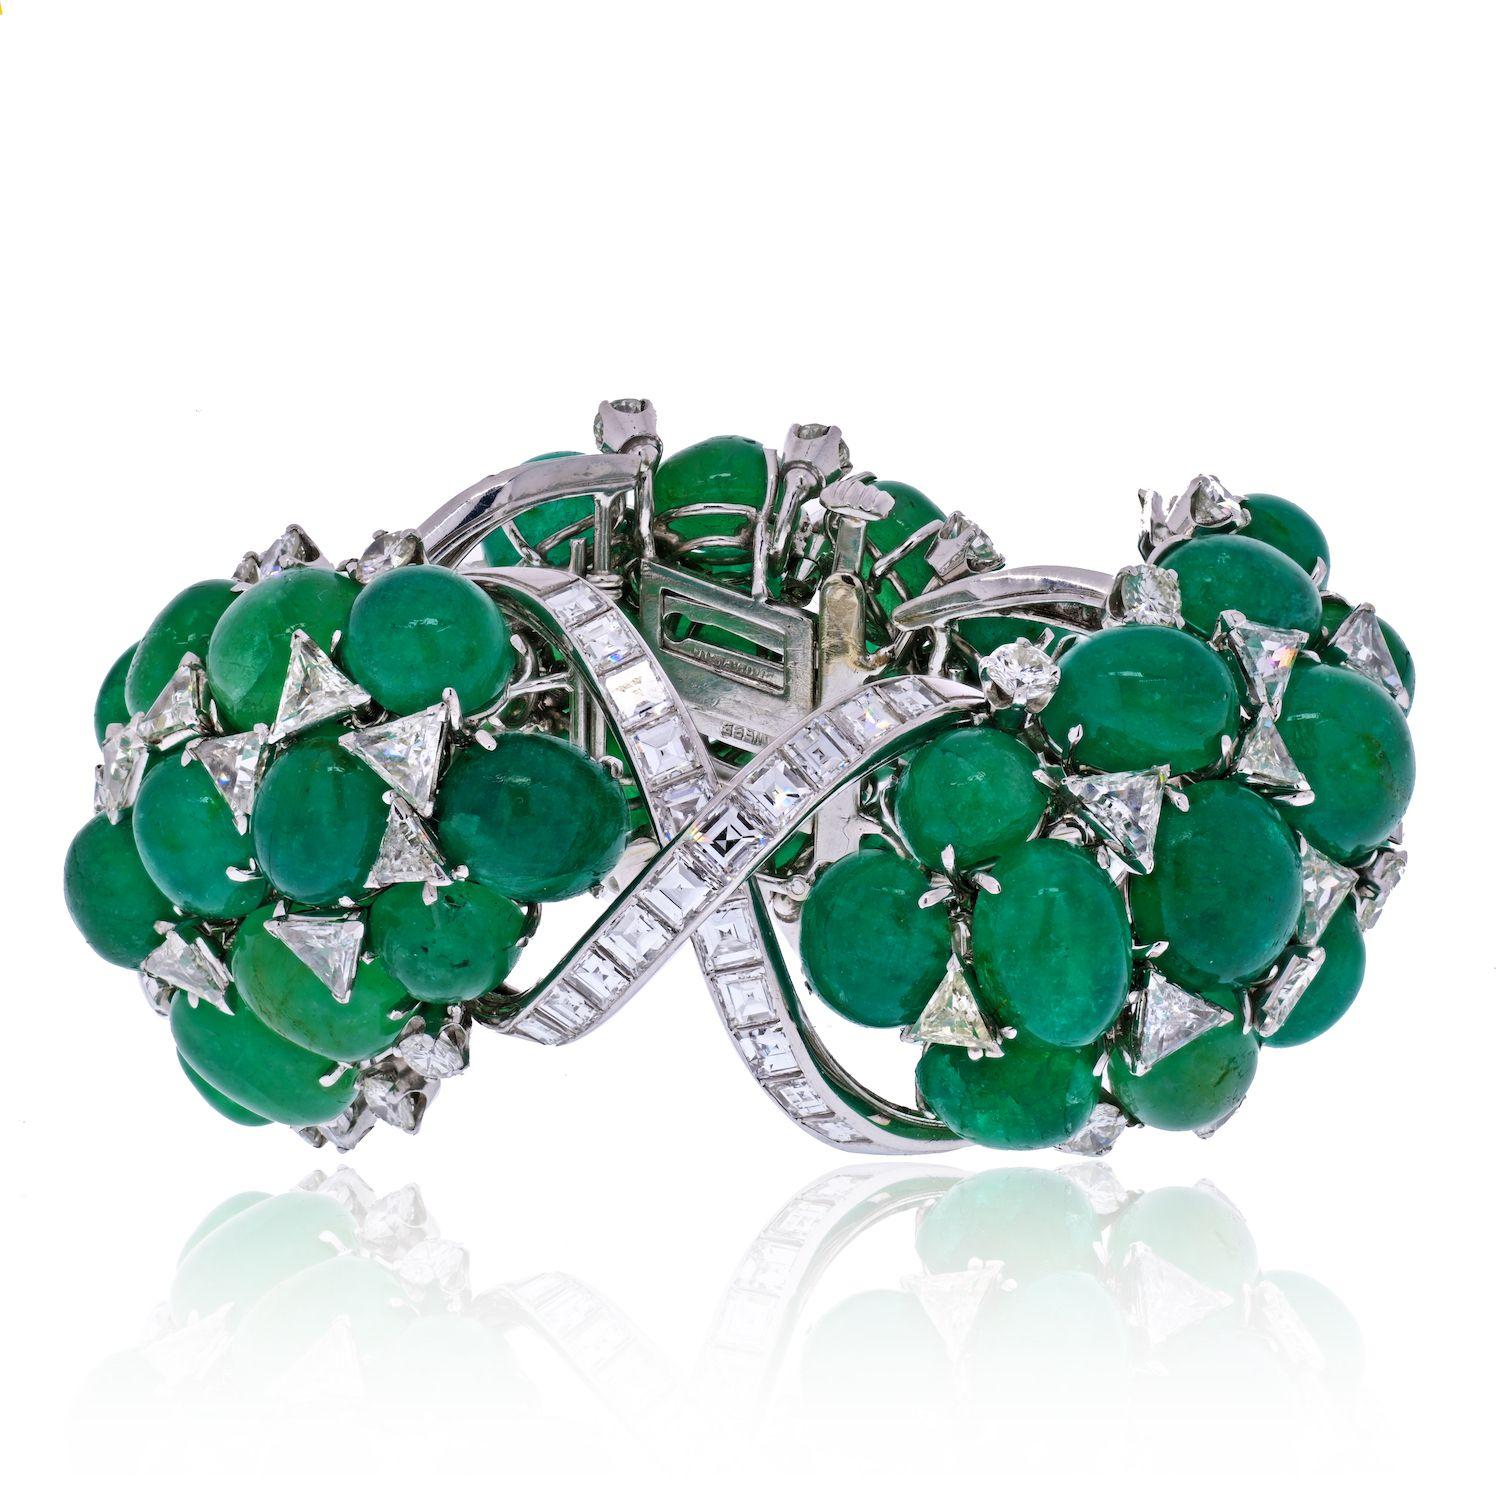 David Webb Platinum Green Emerald And Diamond Flexible Bracelet.
The flexible foliate band, designed as a trilliant and straight-cut diamond vine, set with smooth cabochon green emeralds, accented by circular-cut diamonds on the edges, 7 1/2 ins.,